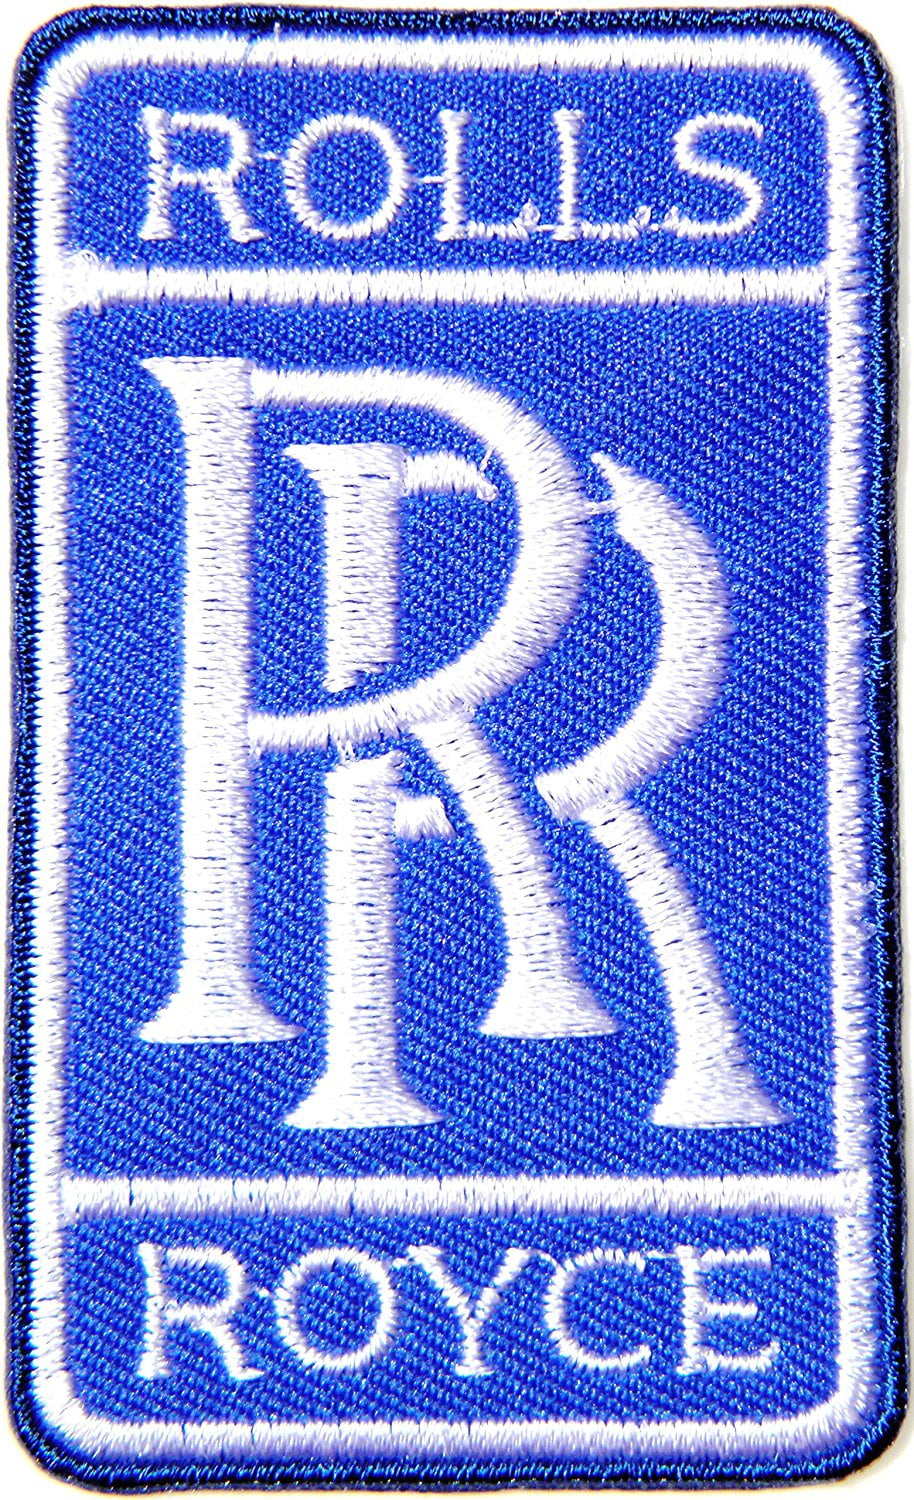 Rolls Royce Classic logo Embroidered Badge /Cloth Patch  Iron or Sew 